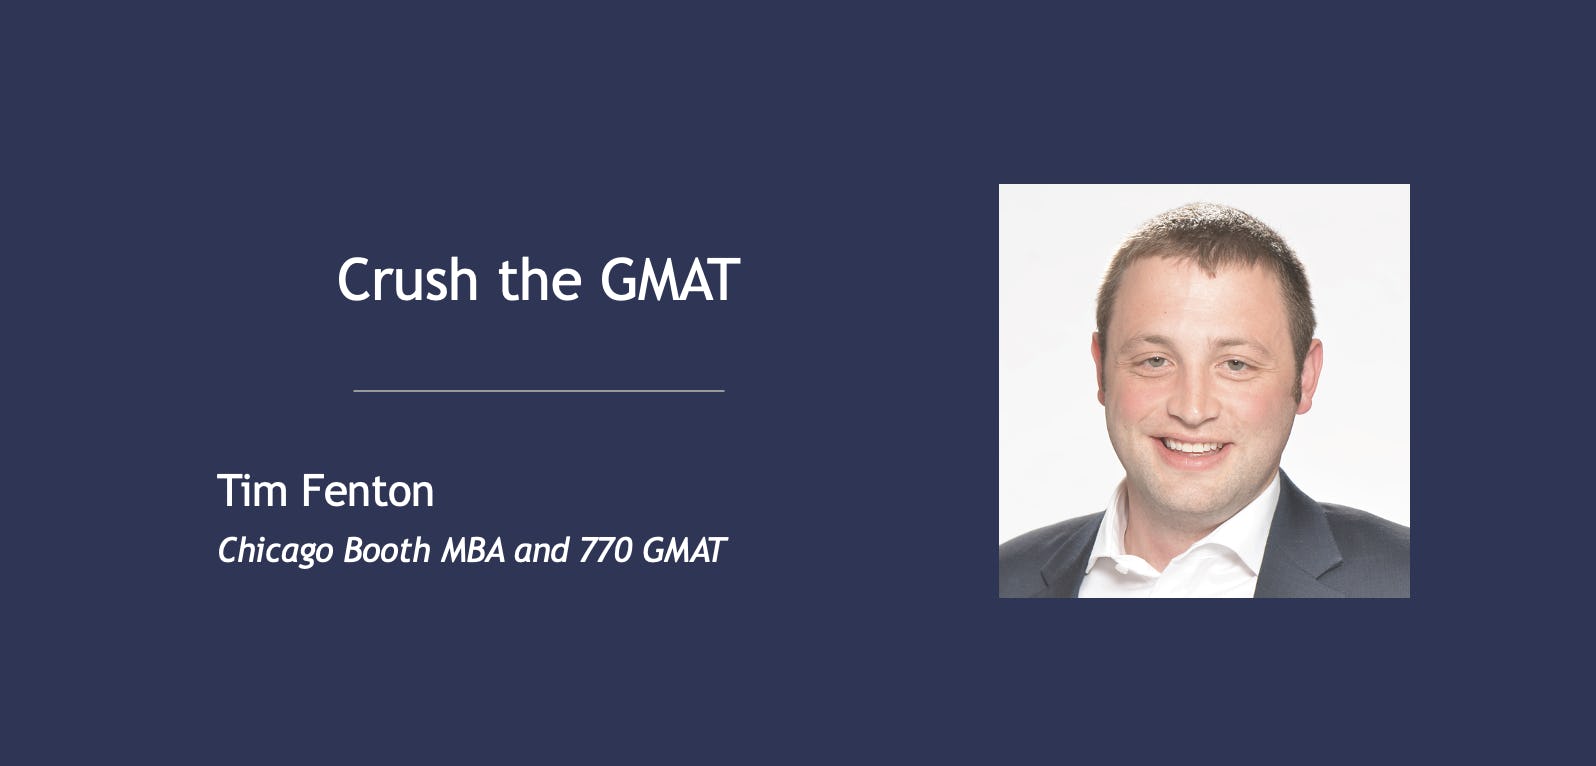 Crush the GMAT - complete pack to help you ace the GMAT